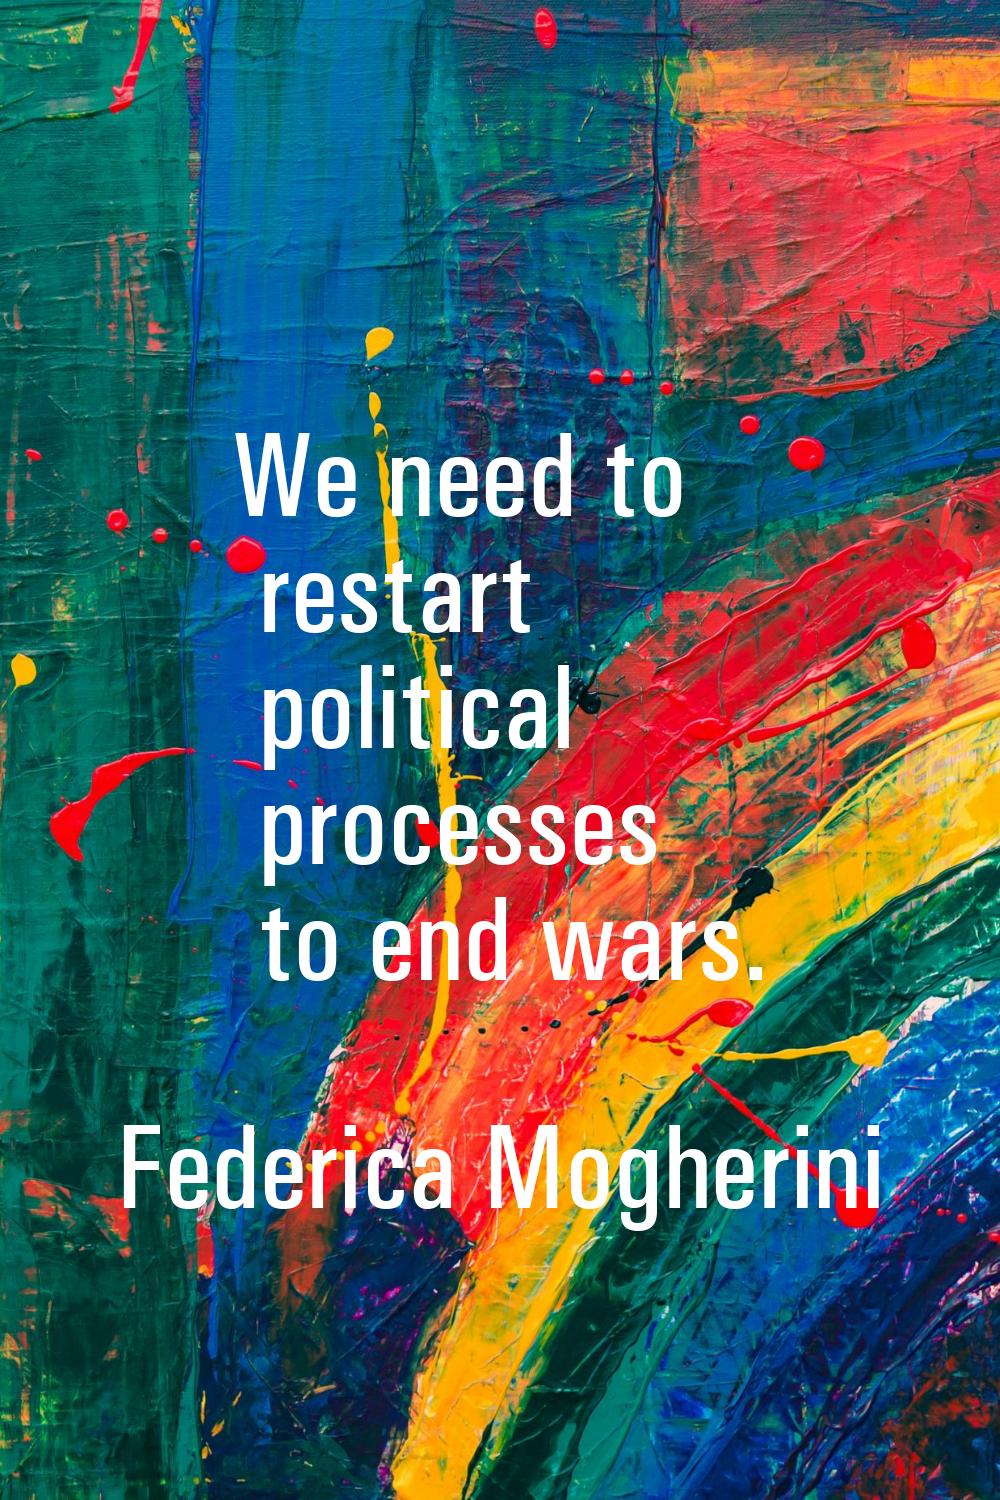 We need to restart political processes to end wars.